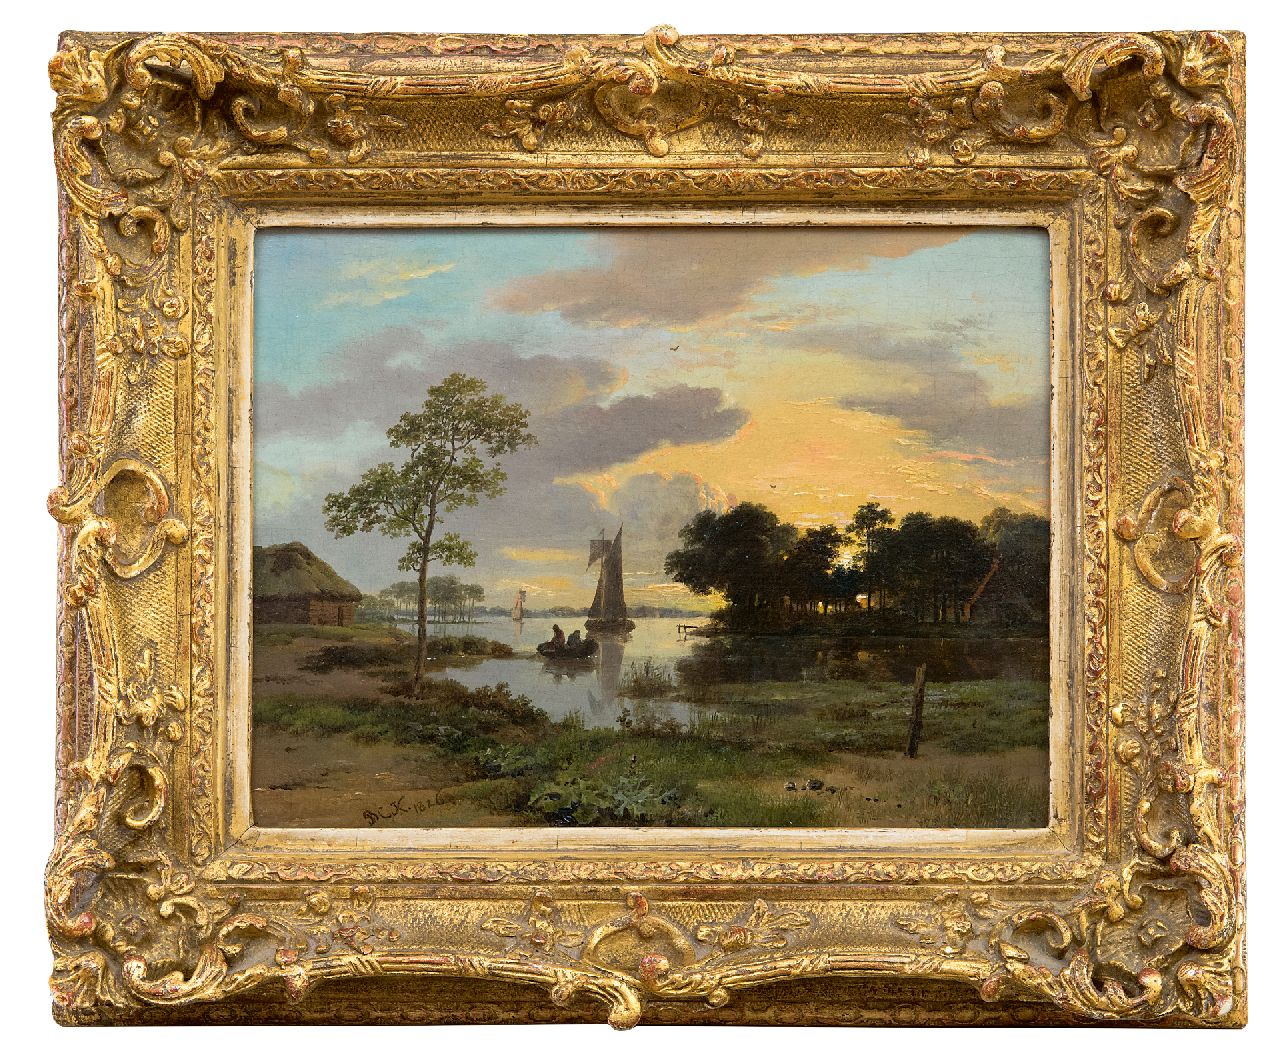 Broek M. van den | Michiel van den Broek | Paintings offered for sale | A riverscape at sunset, oil on panel 17.4 x 23.3 cm, signed l.l. with initials and dated 1826